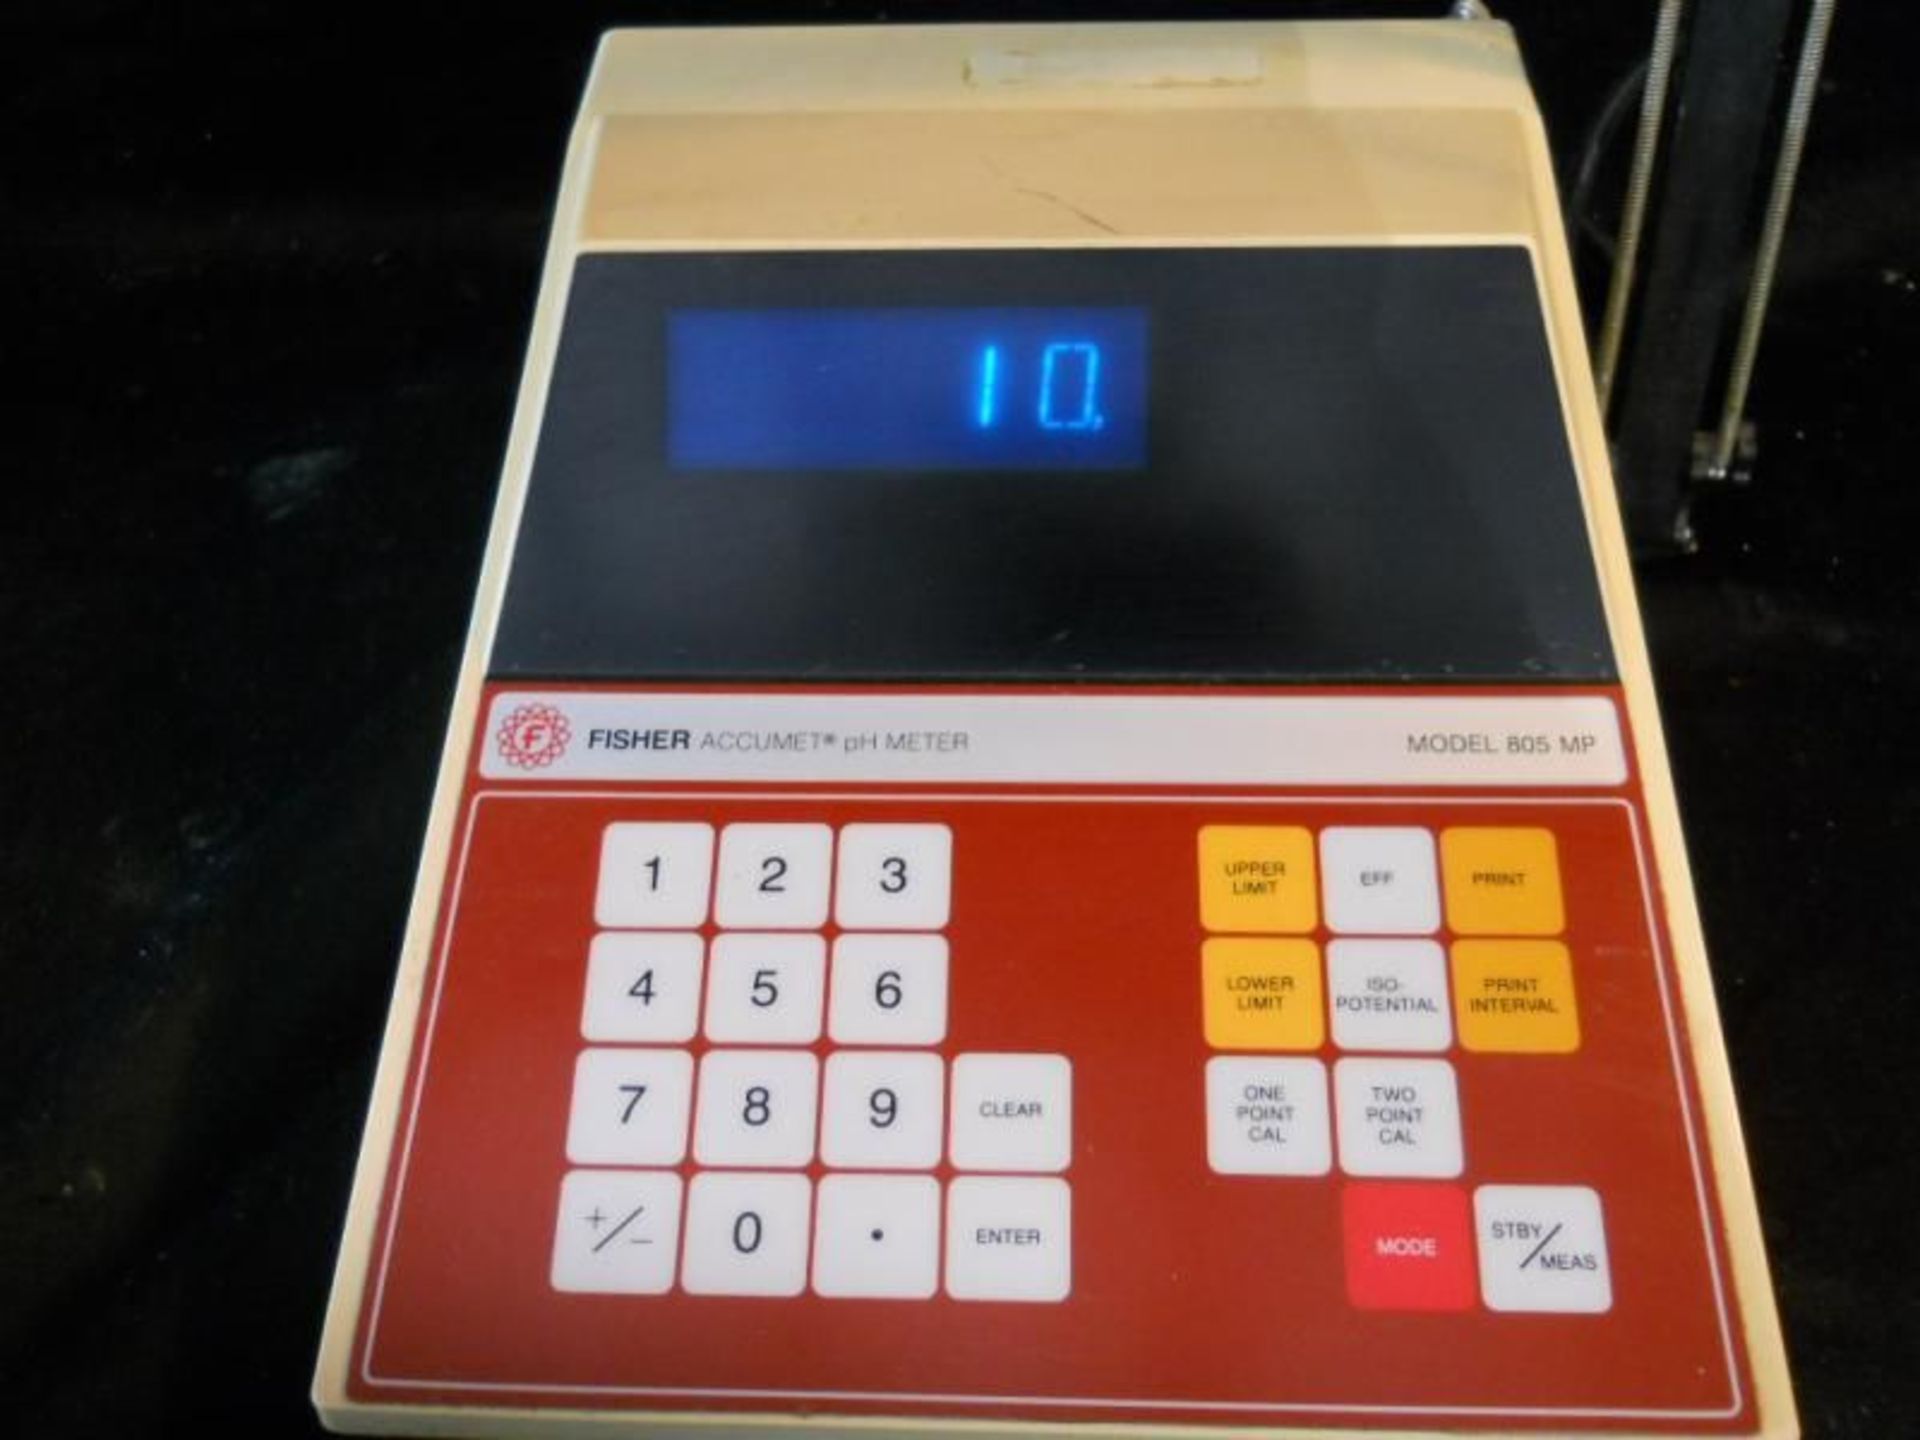 Fisher Scientific Accumet pH Meter Model 805 MP (805MP), Qty 1, 331264004313 - Image 2 of 7